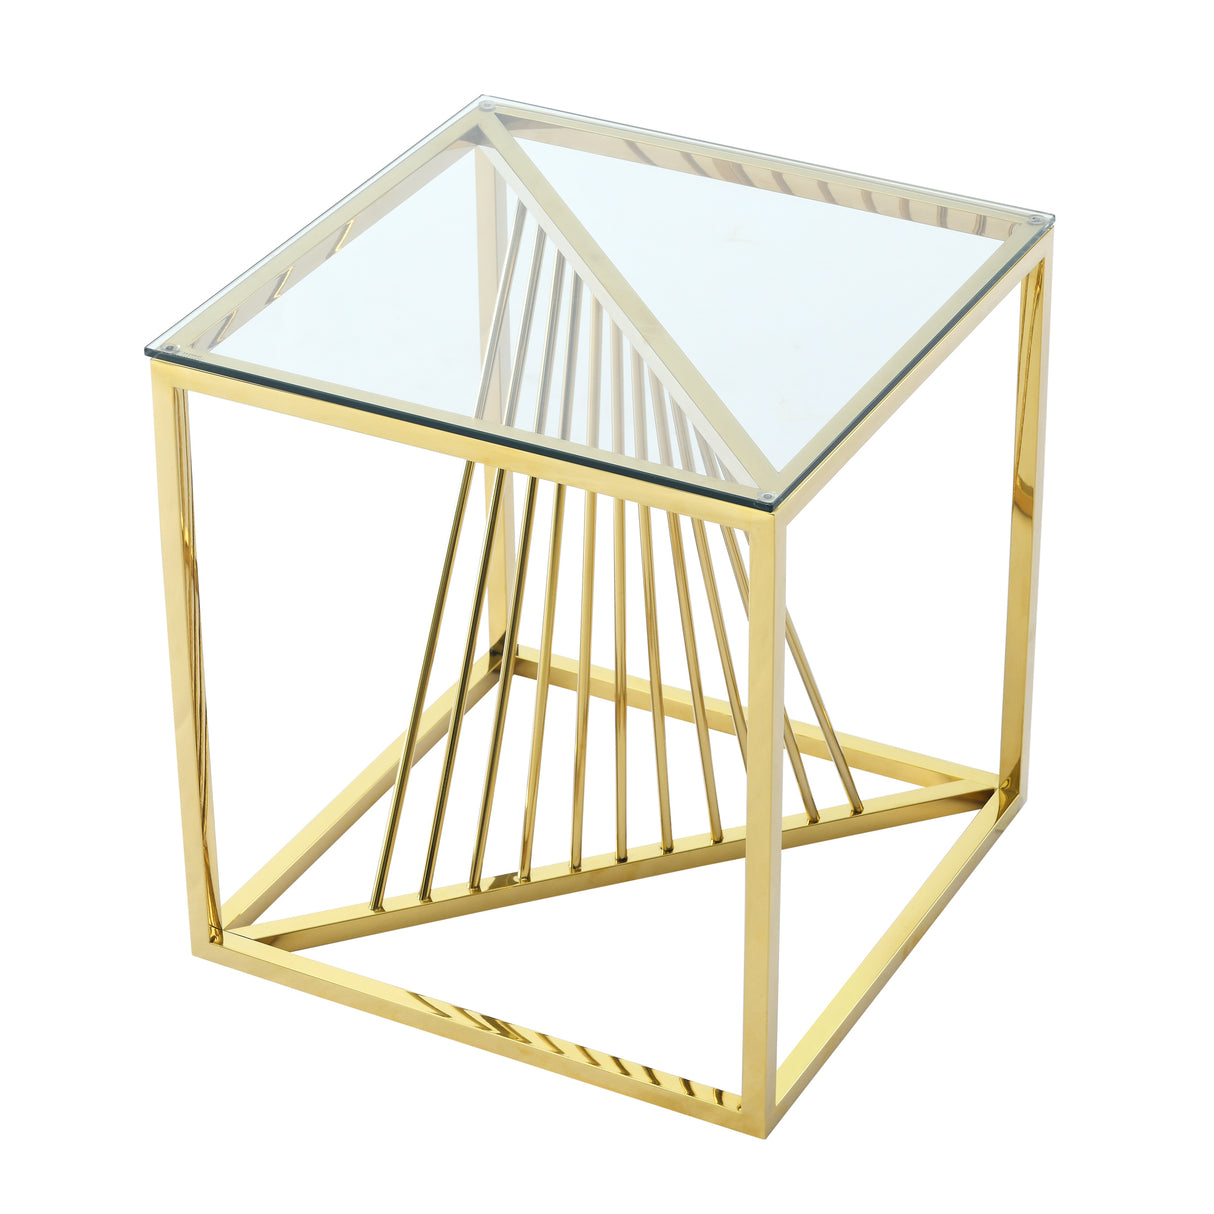 20 Inch Modern Glass End Table with Geometric Metal Frame, Accent Table Nightstand Furniture Corner Table for Living Room,Home Office,Bedroom - Gold - Home Elegance USA